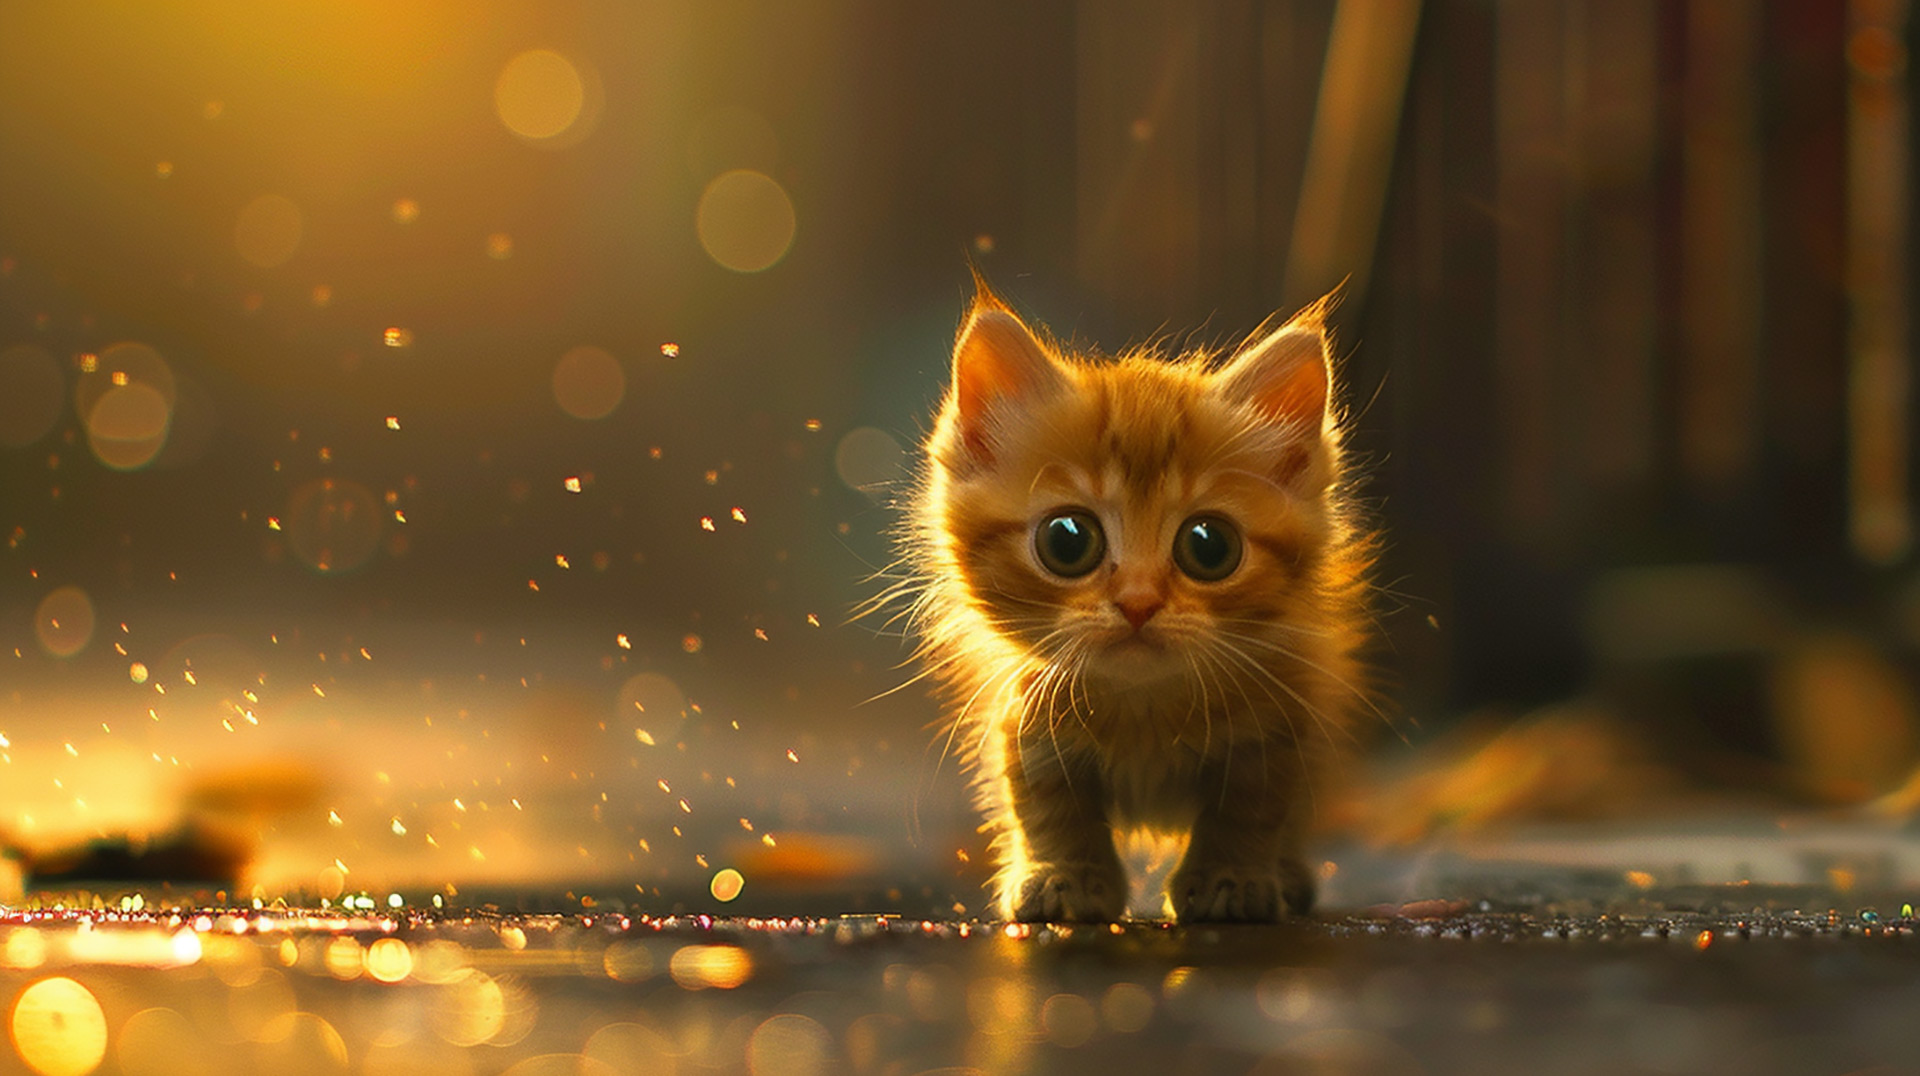 Transform Your Screen with Cute Cat Wallpapers in 4K